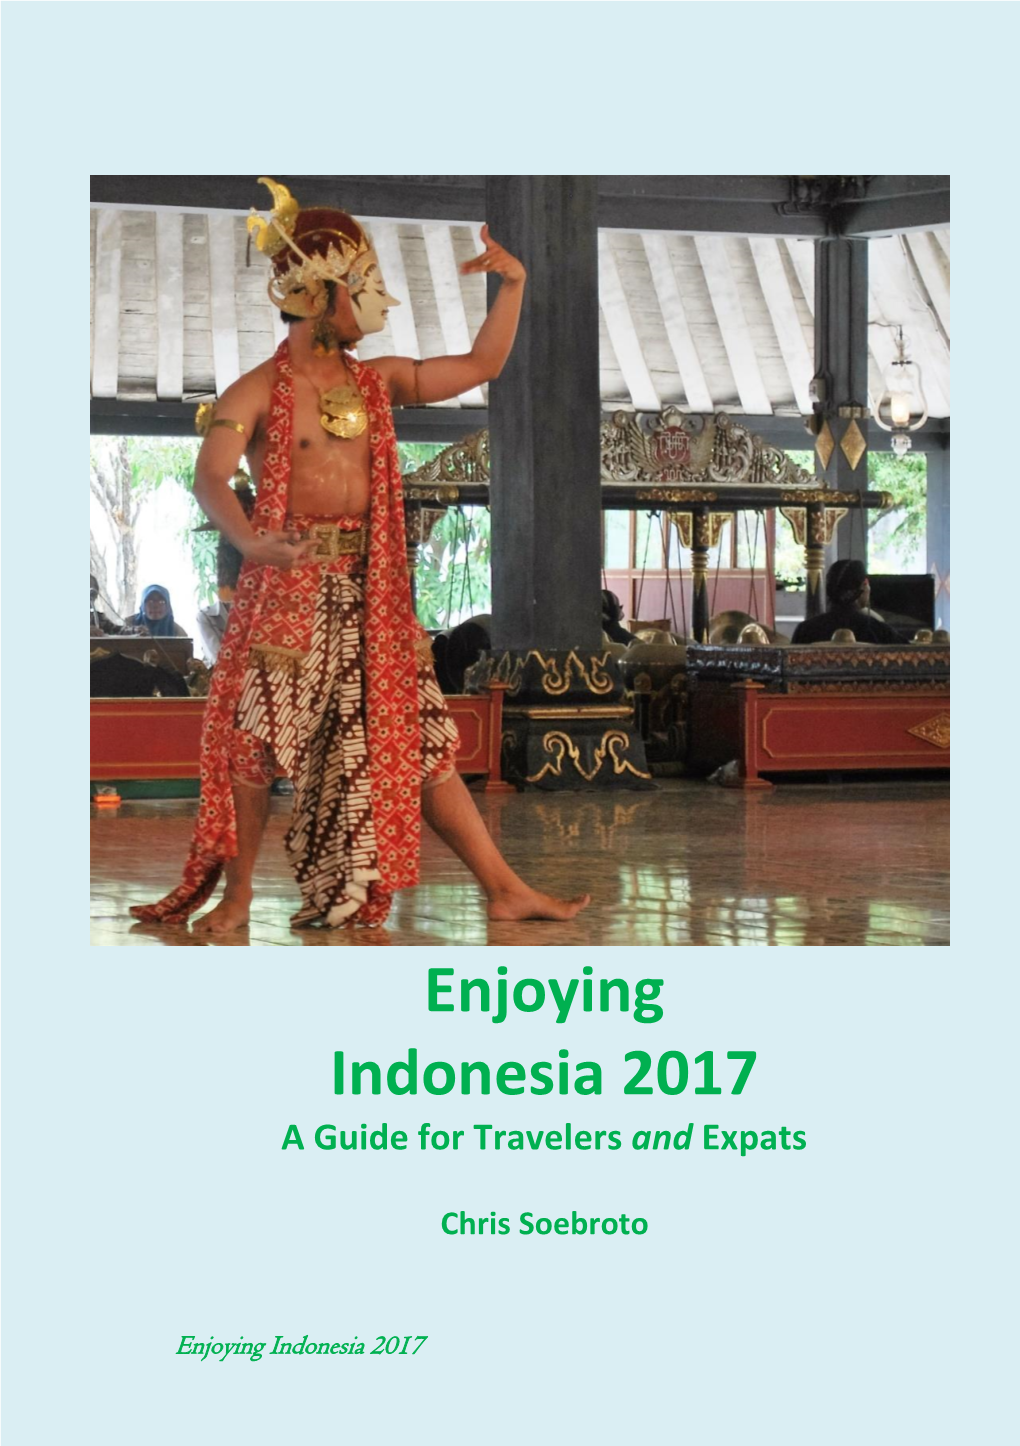 Enjoying Indonesia 2017 a Guide for Travelers and Expats